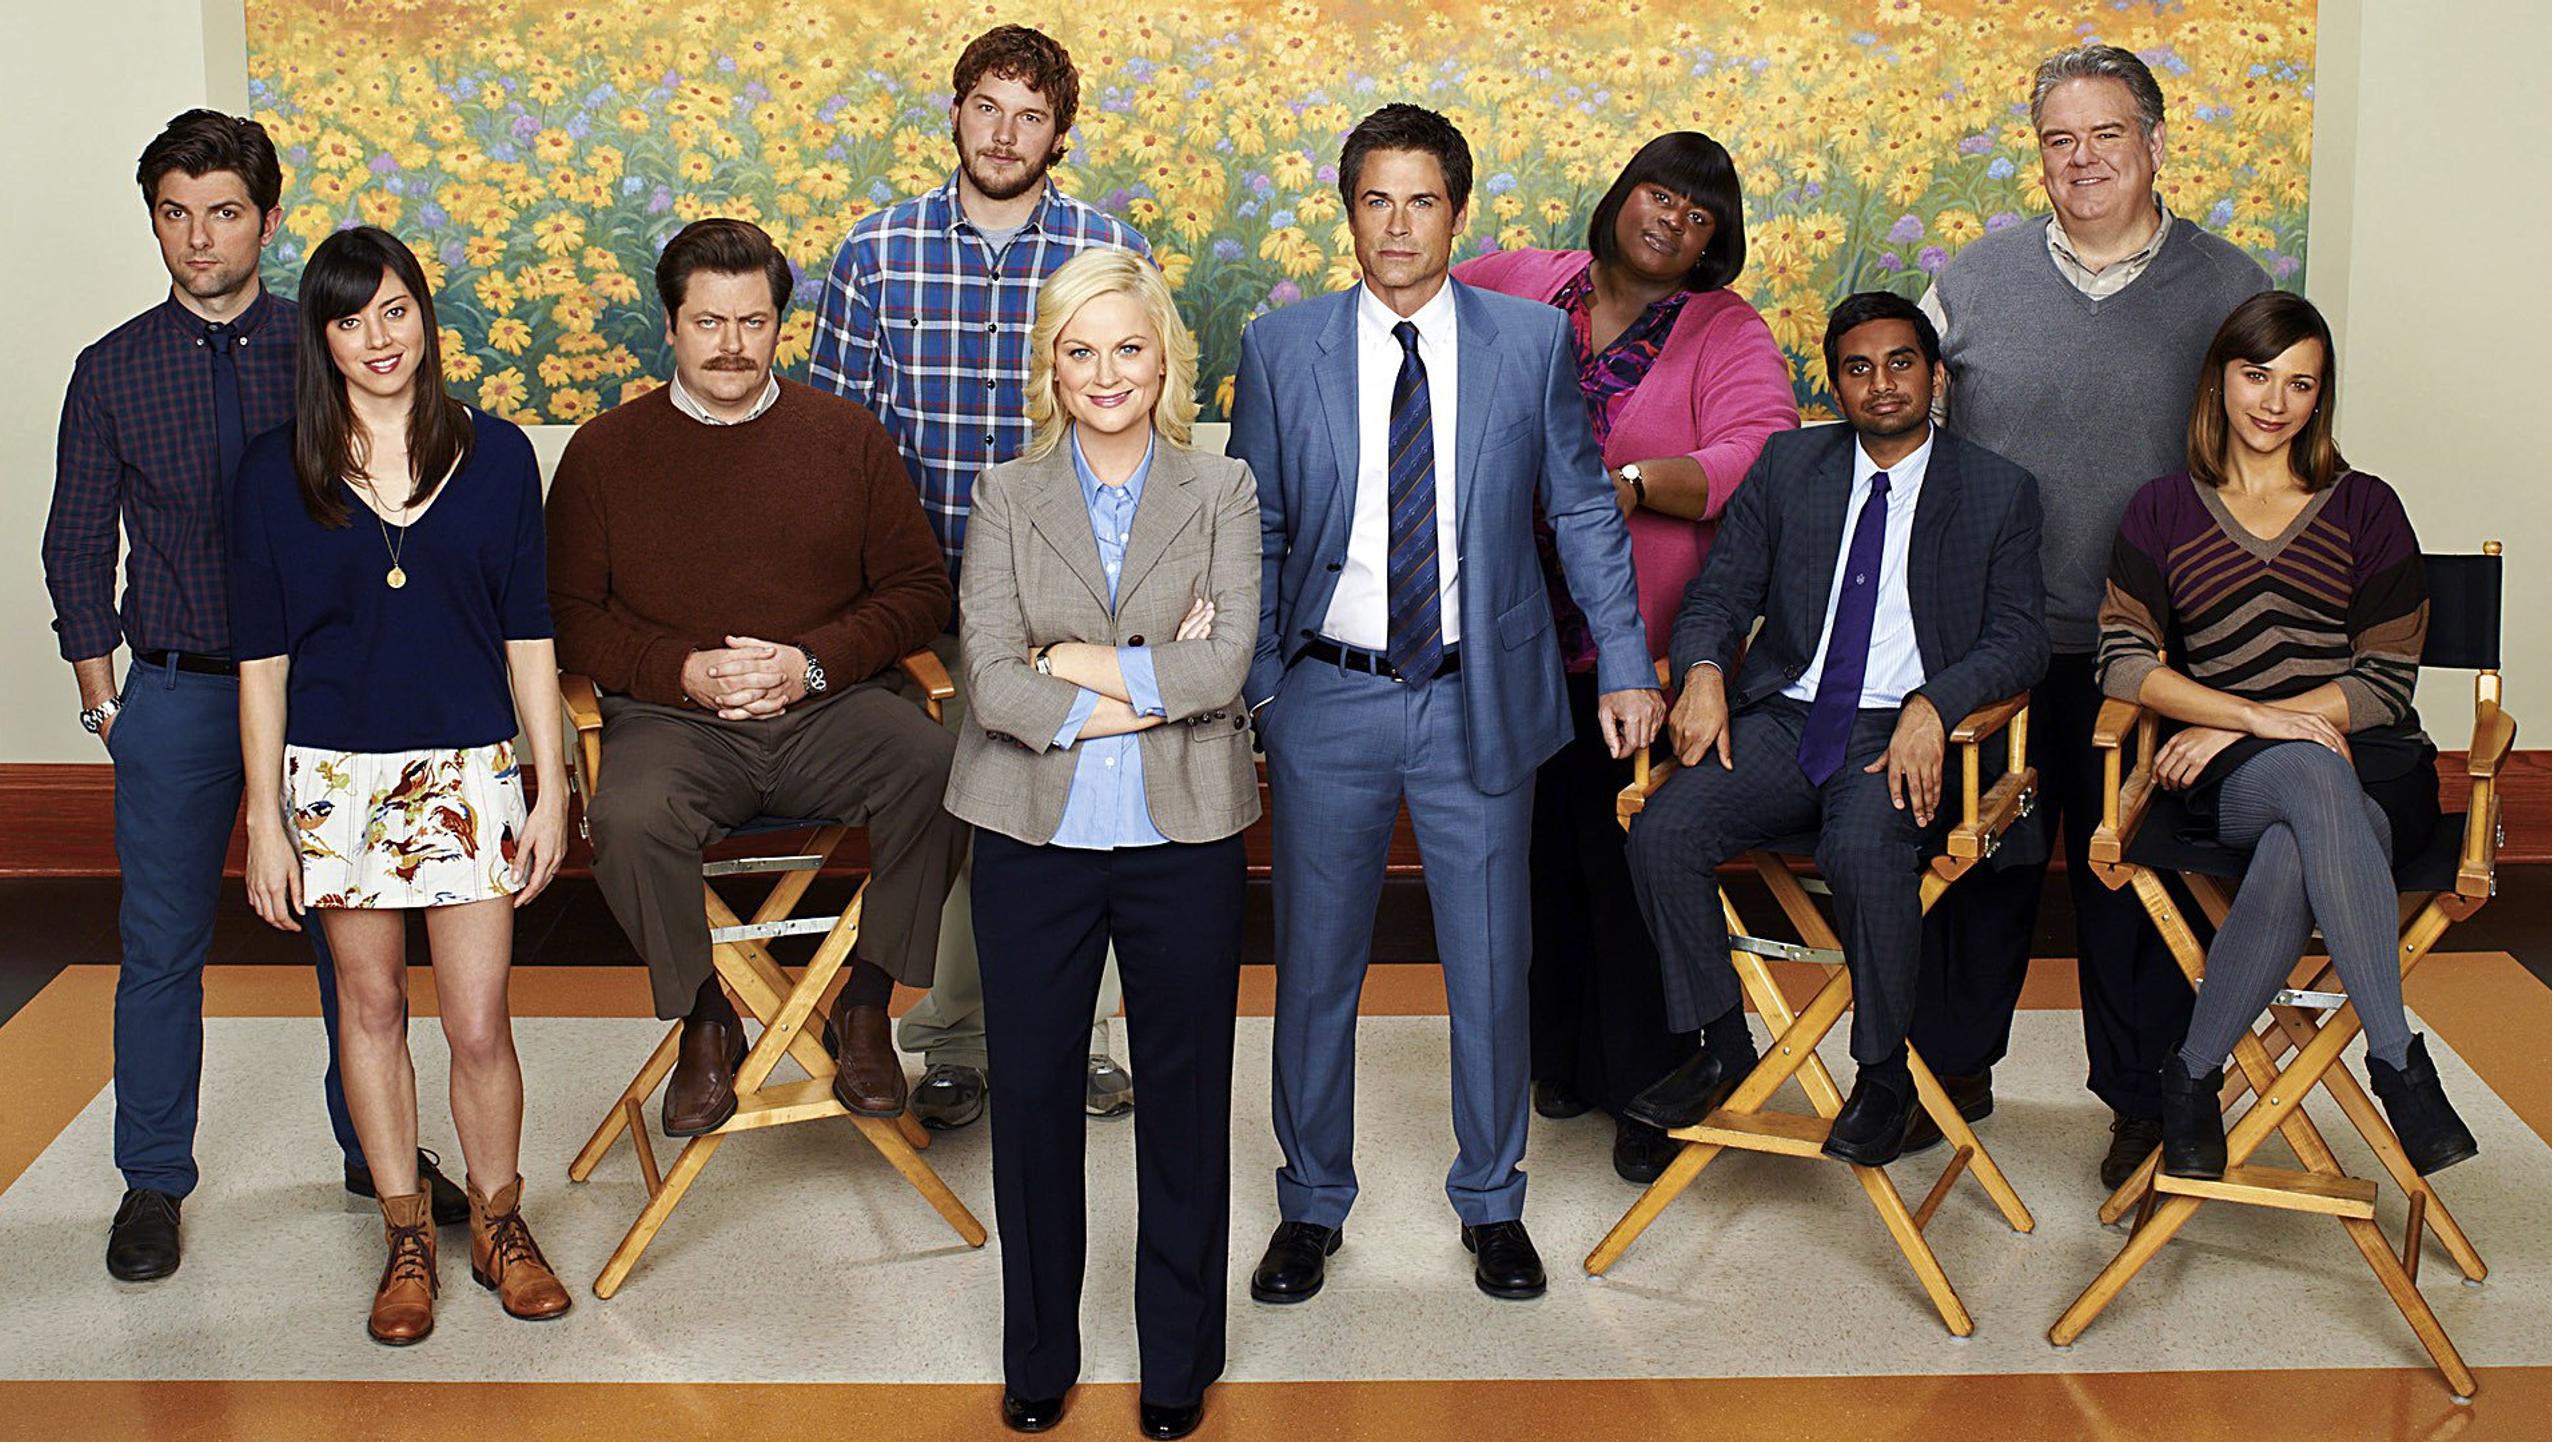 Parks And Recreation Wallpapers